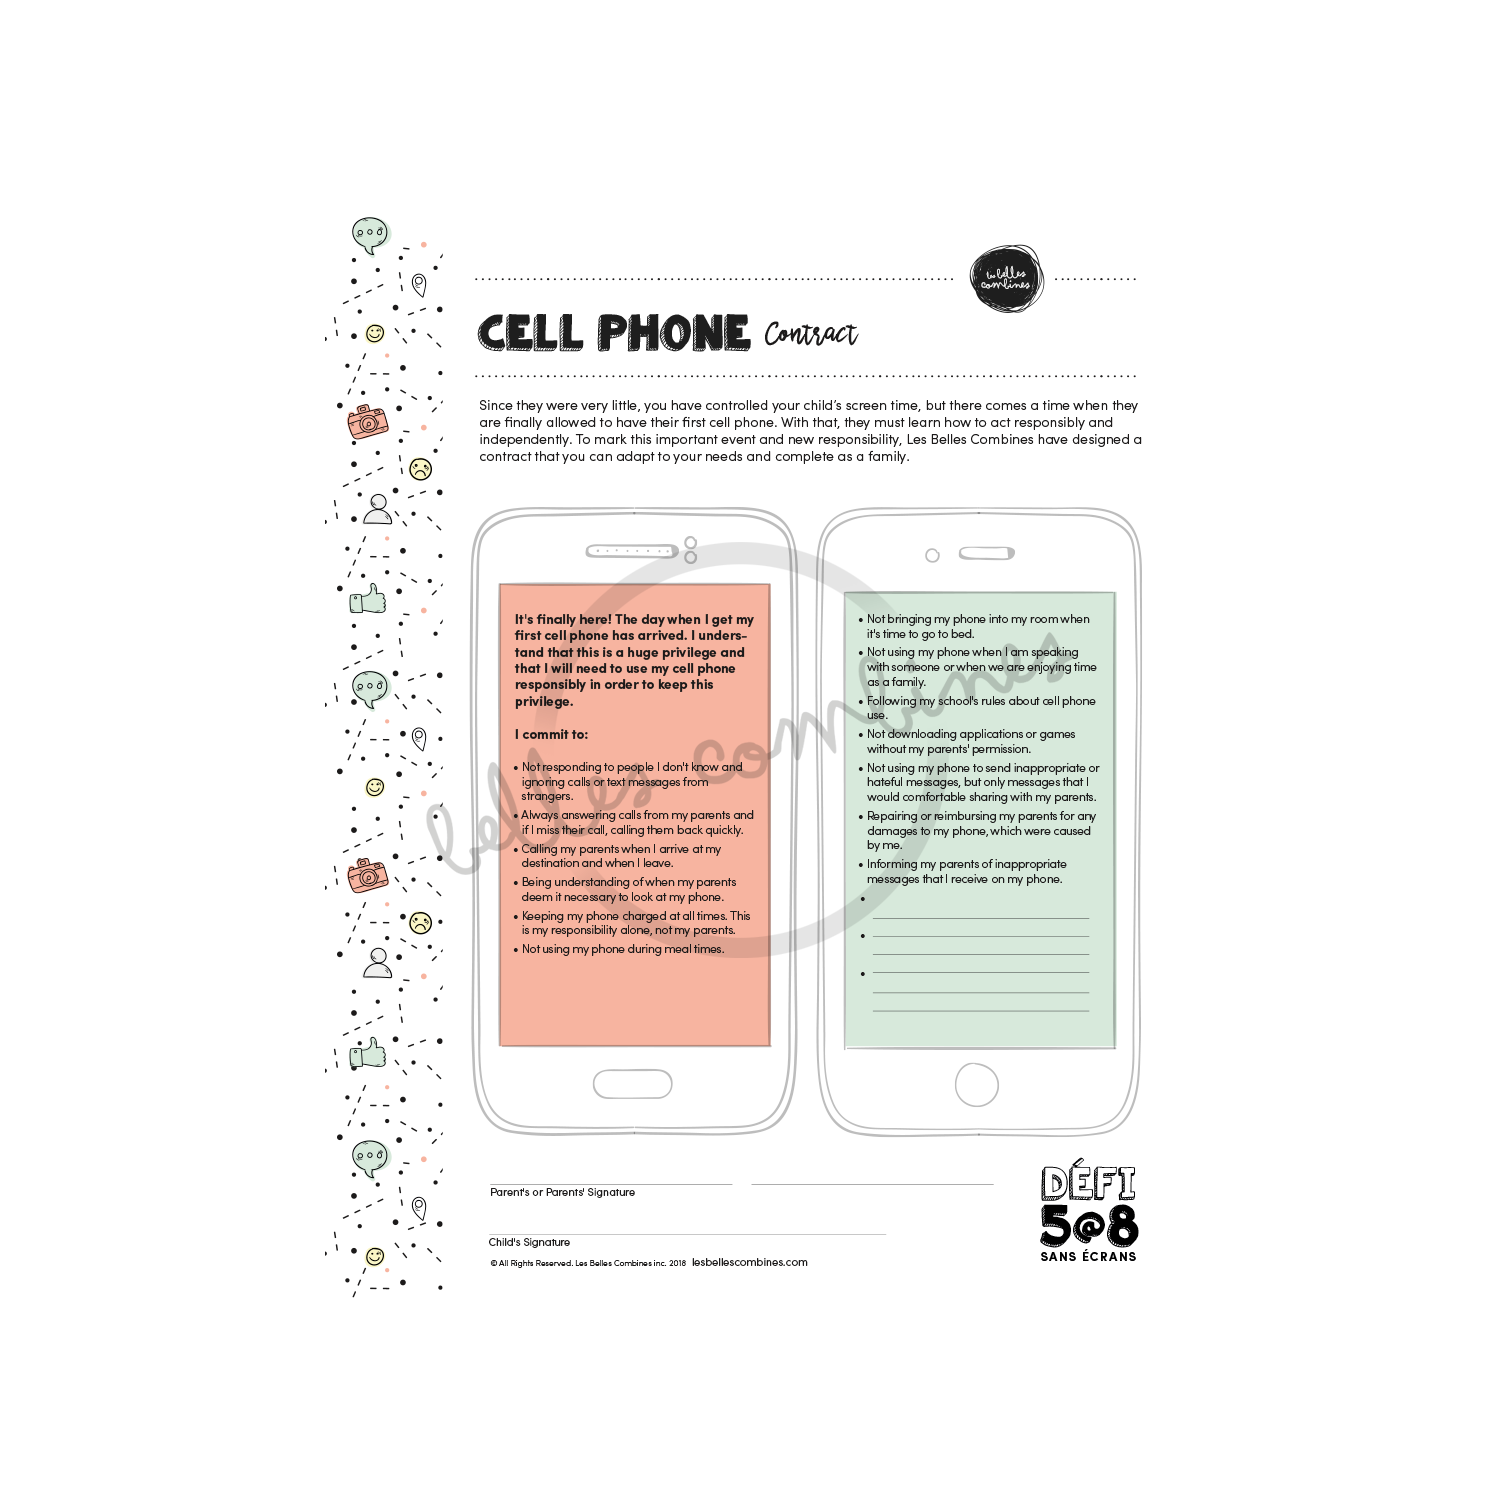 English version of the cell phone contract to print made by Les Belles Combines